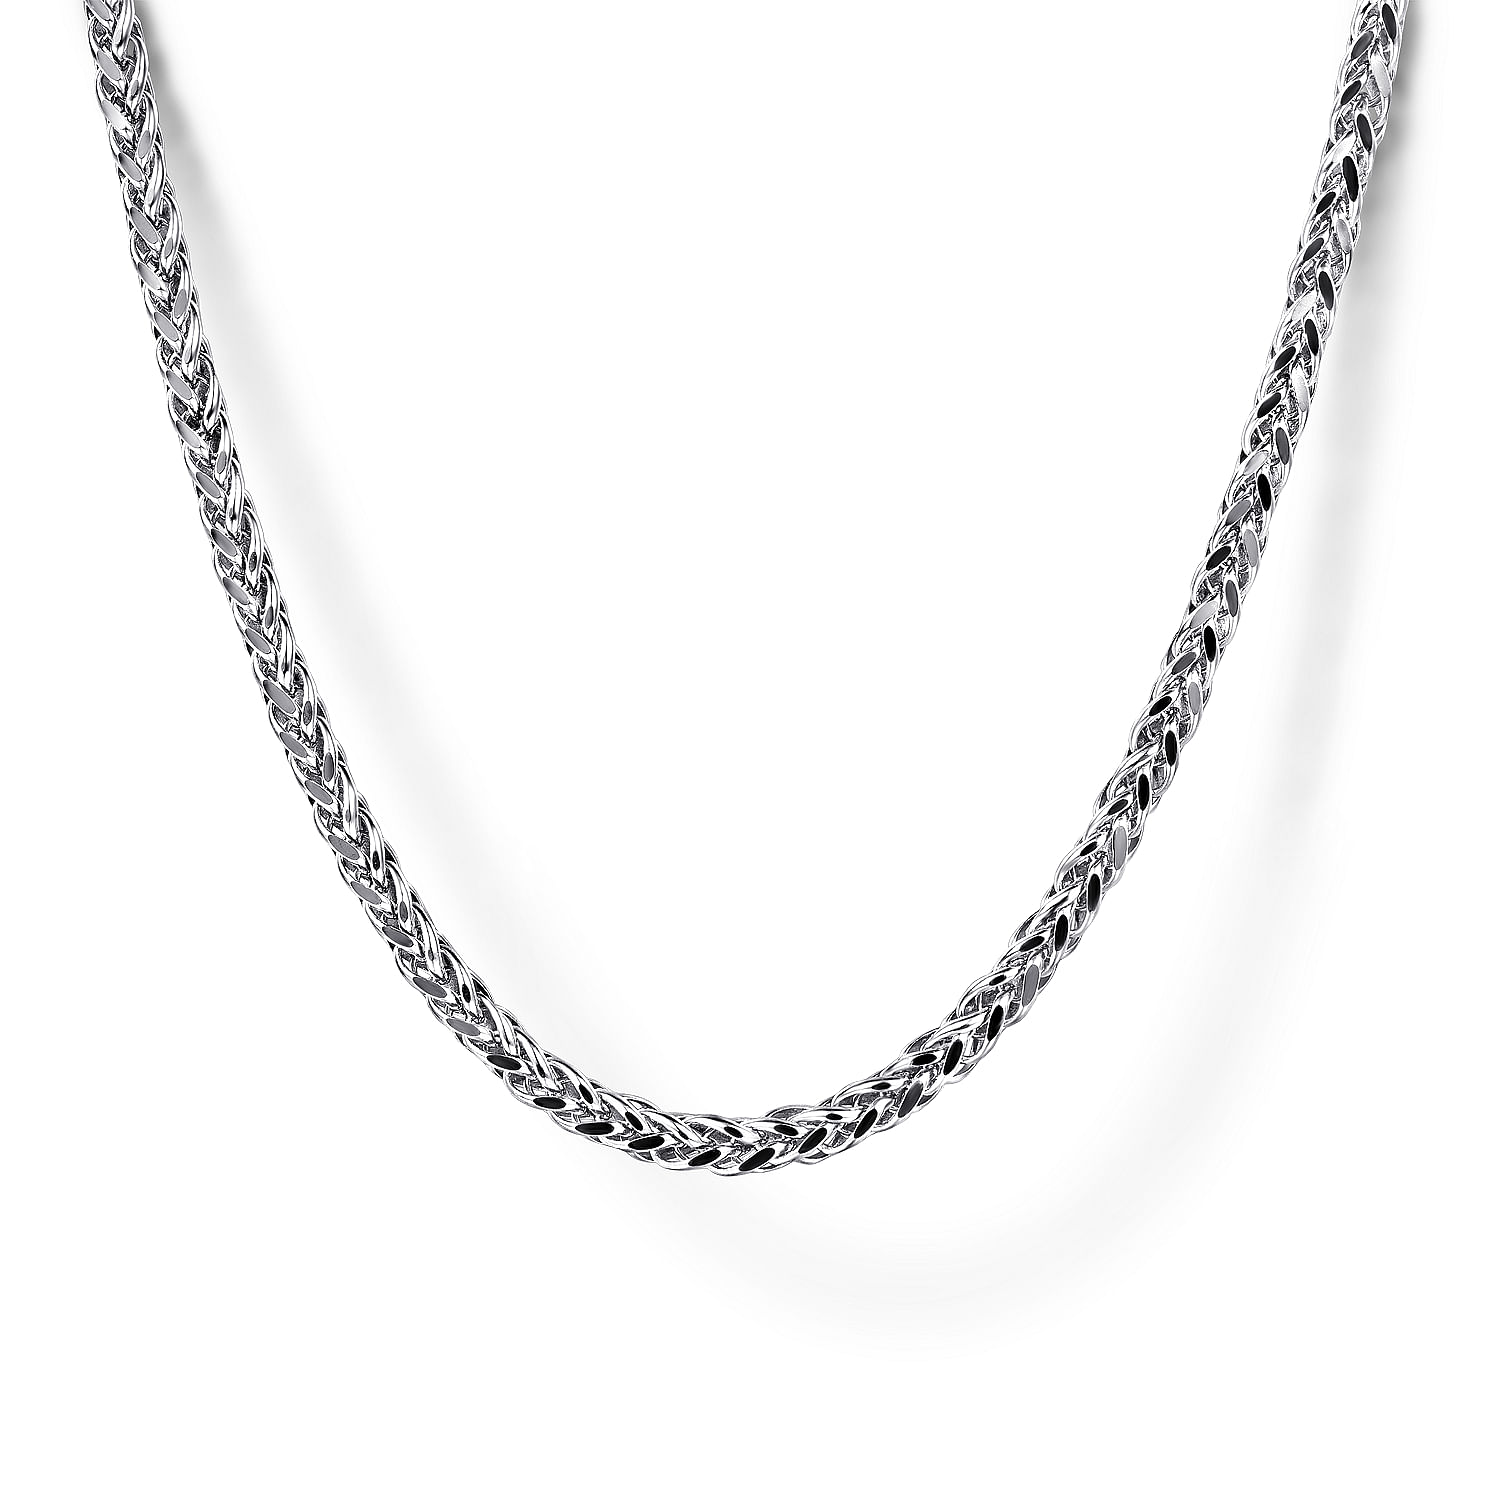 22-Inch-925-Sterling-Silver-Men's-Wheat-Chain-Necklace1